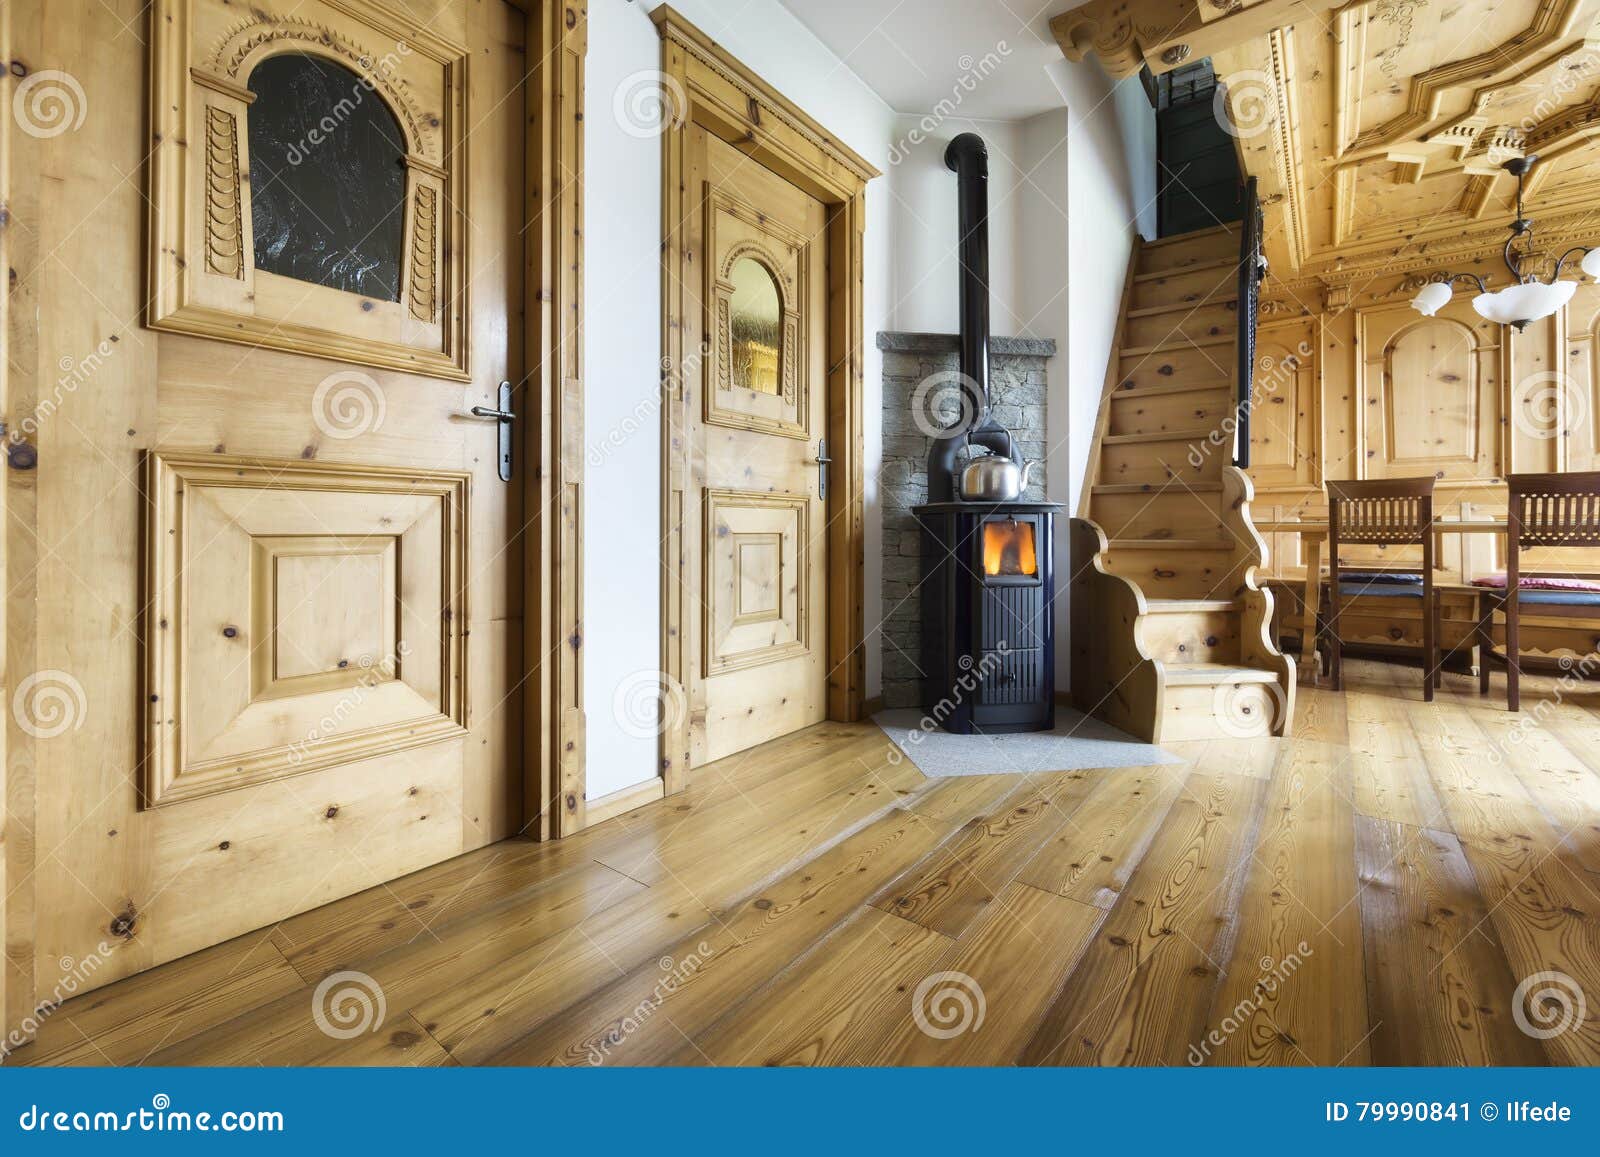 Mountain Chalet Interior Stock Image Image Of Room Wooden